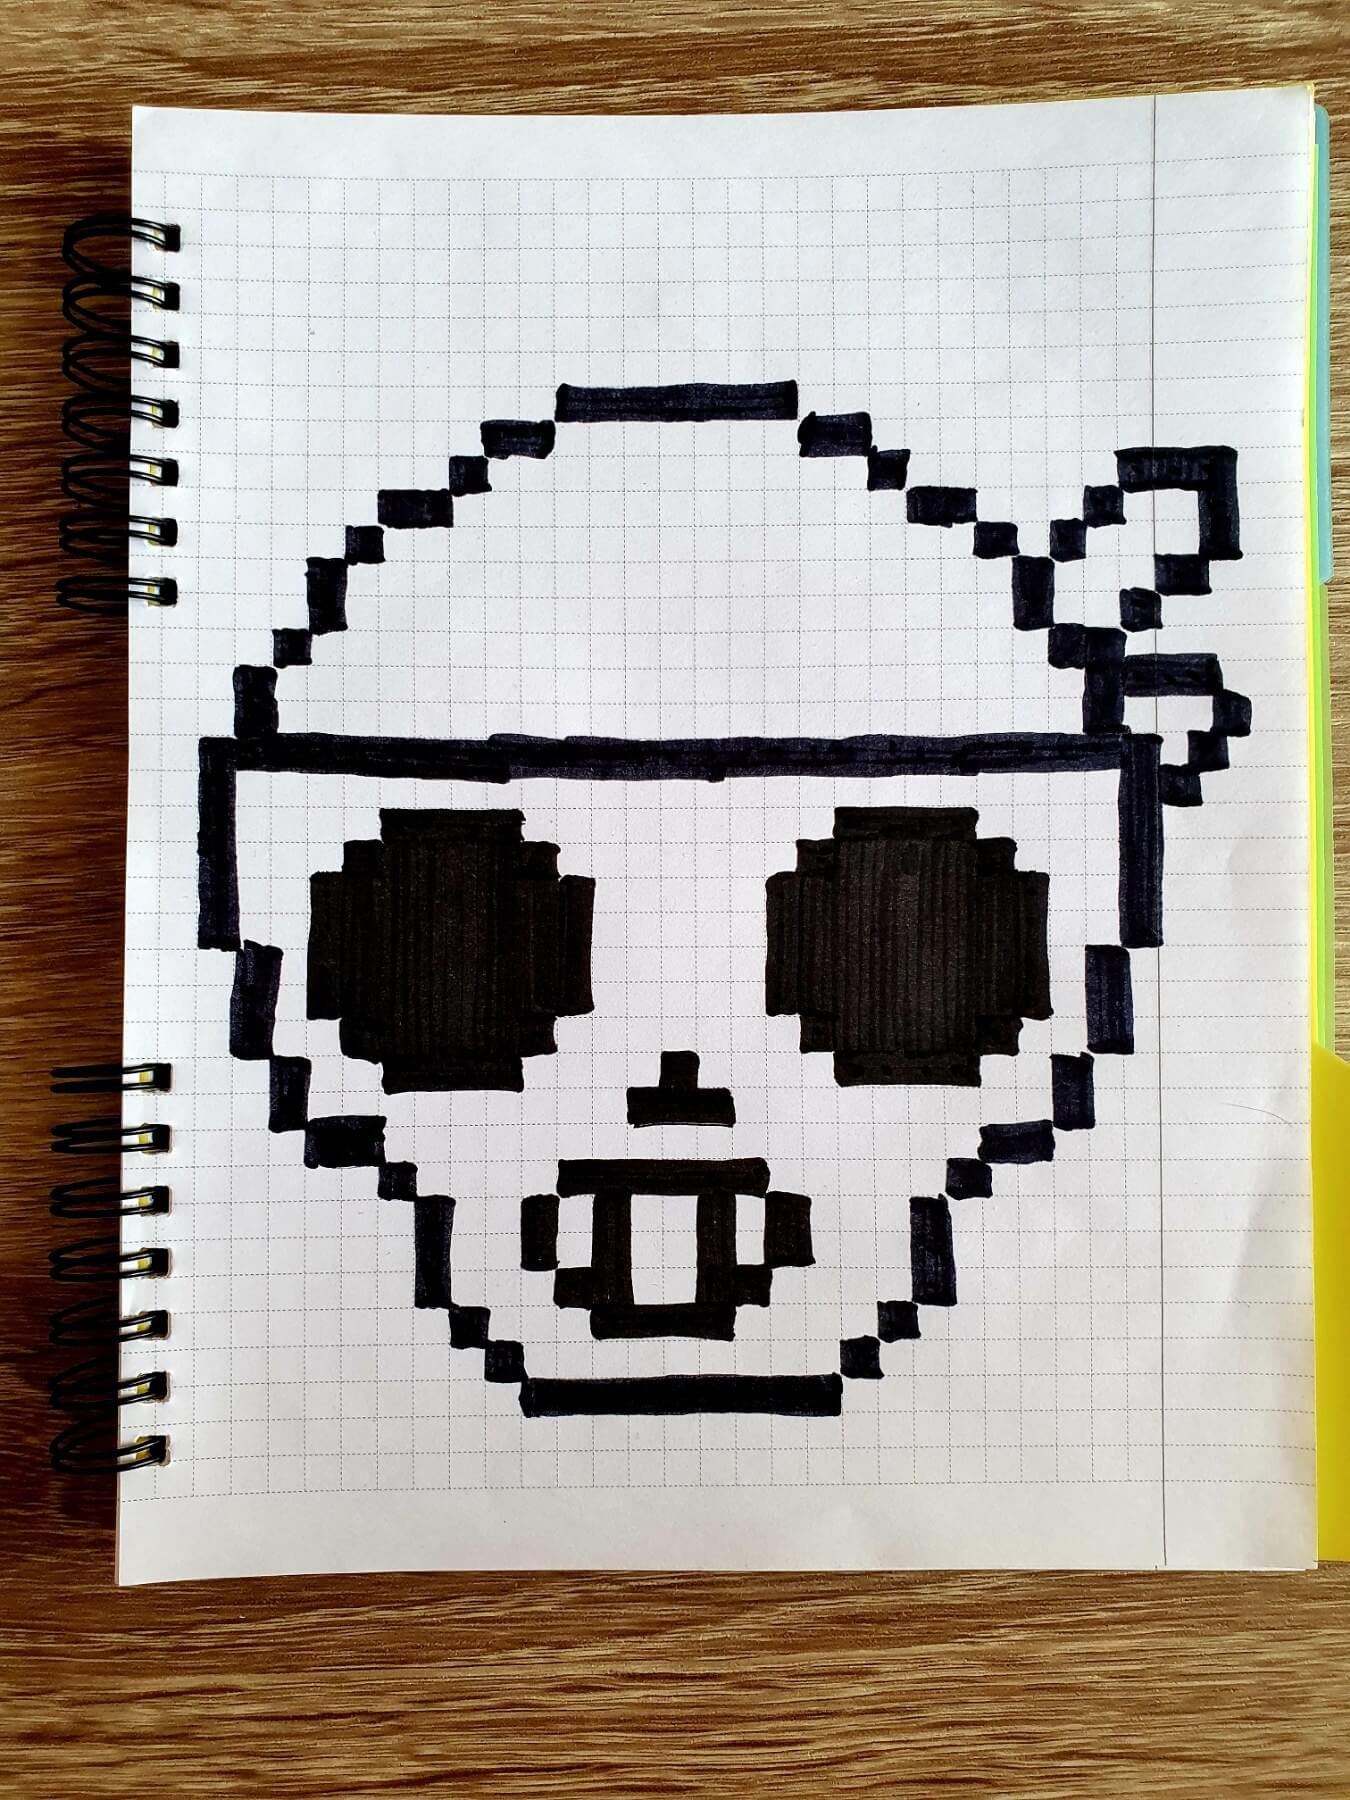 So far from Brawl Stars. Drawing on the cells. drawings by cells, pixel art, pixel drawings